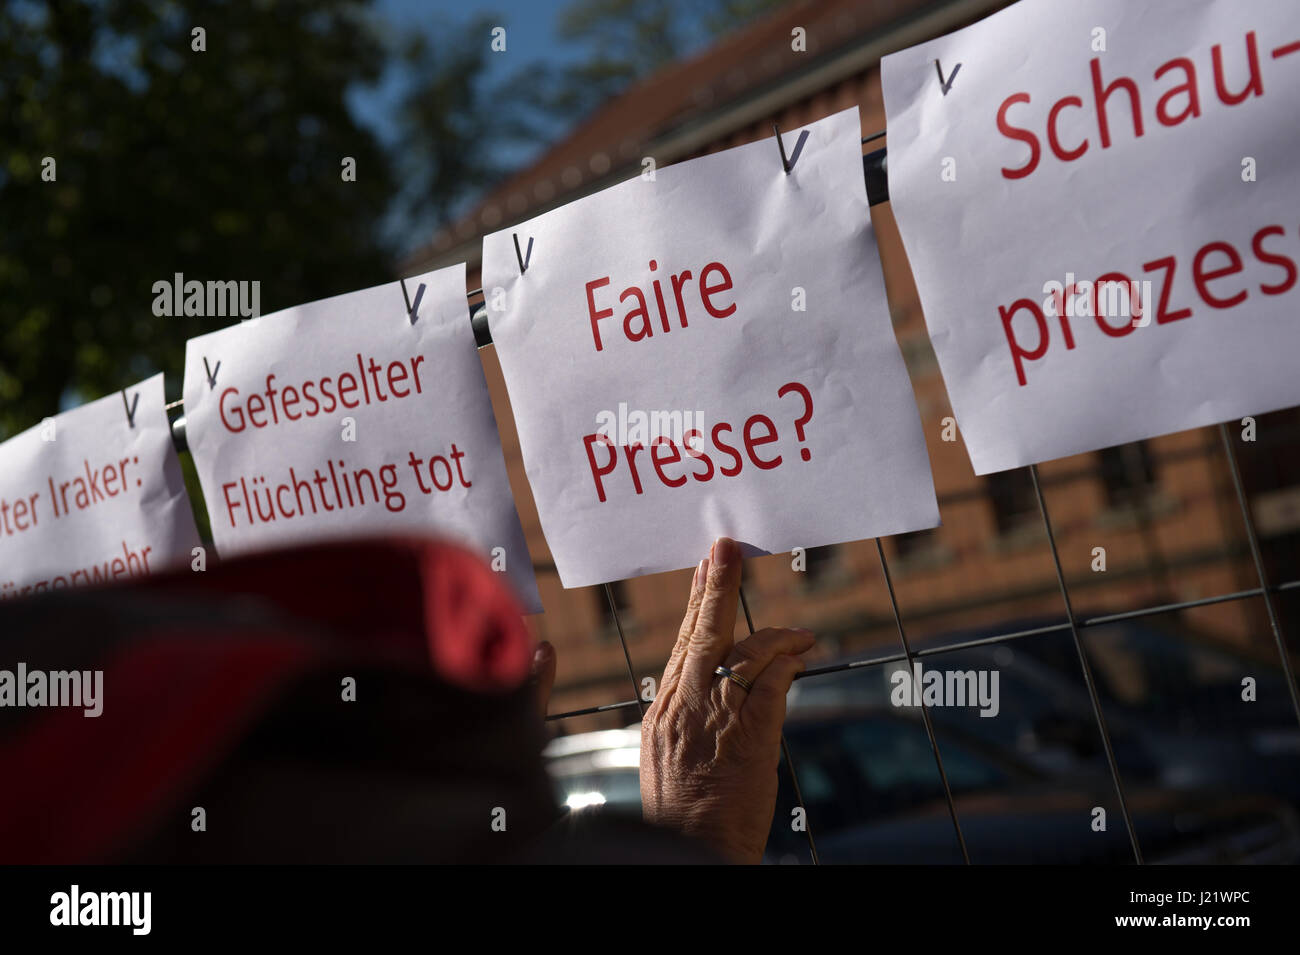 Kamenz, Germany. 24th Apr, 2017. Signs reading "fettered refugee dead", "Fair Press?" and "Show Trial" can be seen in front of the district court in Kamenz, Germany, 24 April 2017. Almost a year after the four men forced a psychologically unsound refugee from a supermarket and tied him to a tree they are now standing trial at court. The defendants between the ages of 29 abd 56 are accused of deprivation of liberty. They all plead not guilty and state that the Iraqi man posed a threat to a female cashier at the supermarket in Arnsdorf. Photo: Arno Burgi/dpa-Zentralbild/dpa/Alamy Live News Stock Photo